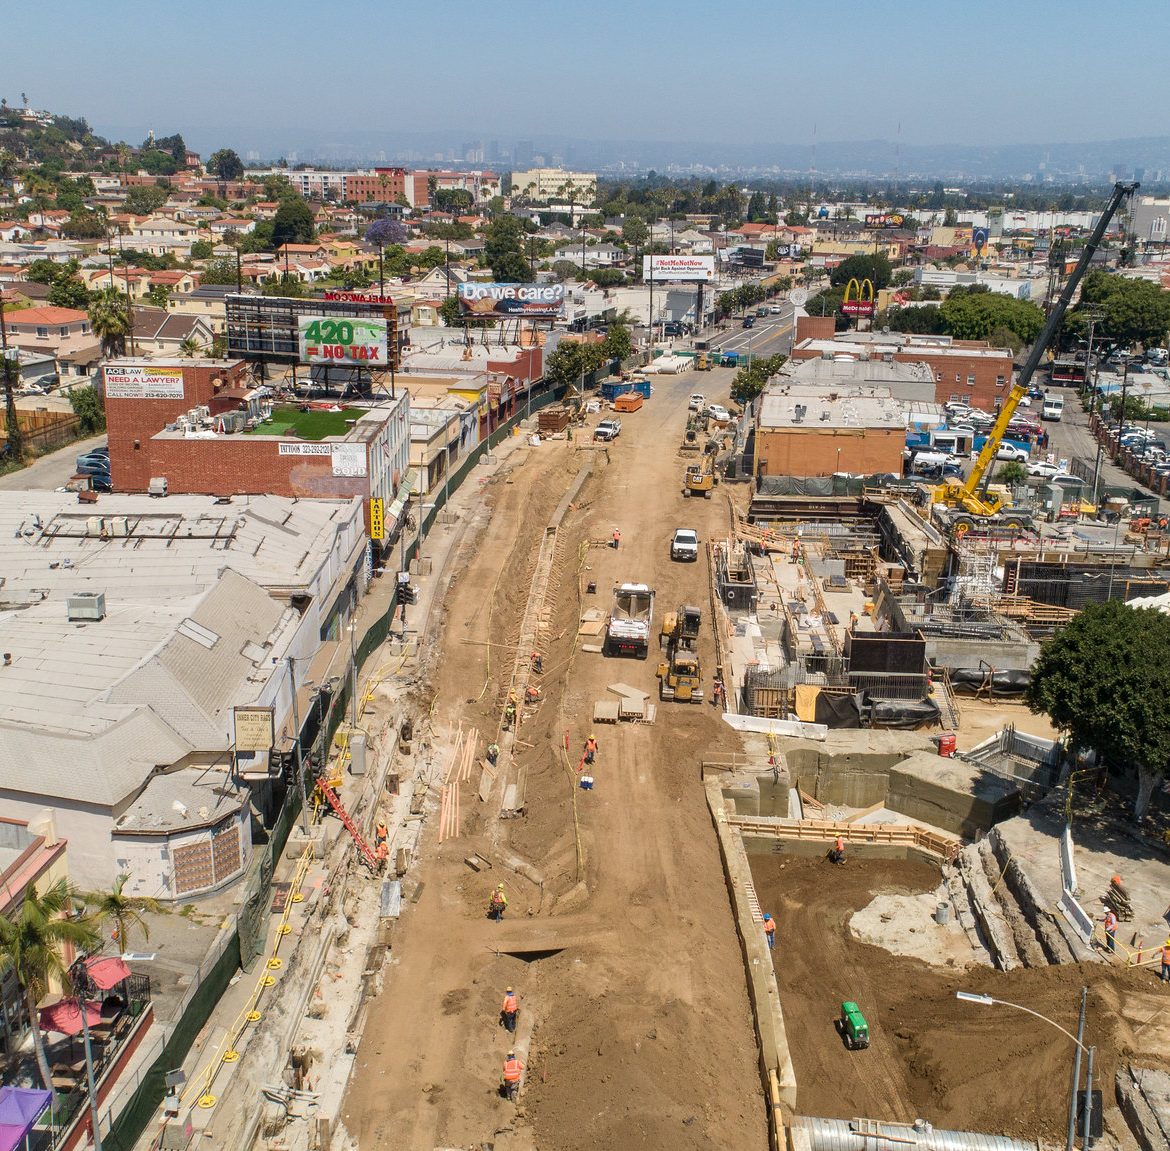 Bird's eye view of construction on a wide road in Los Angeles.